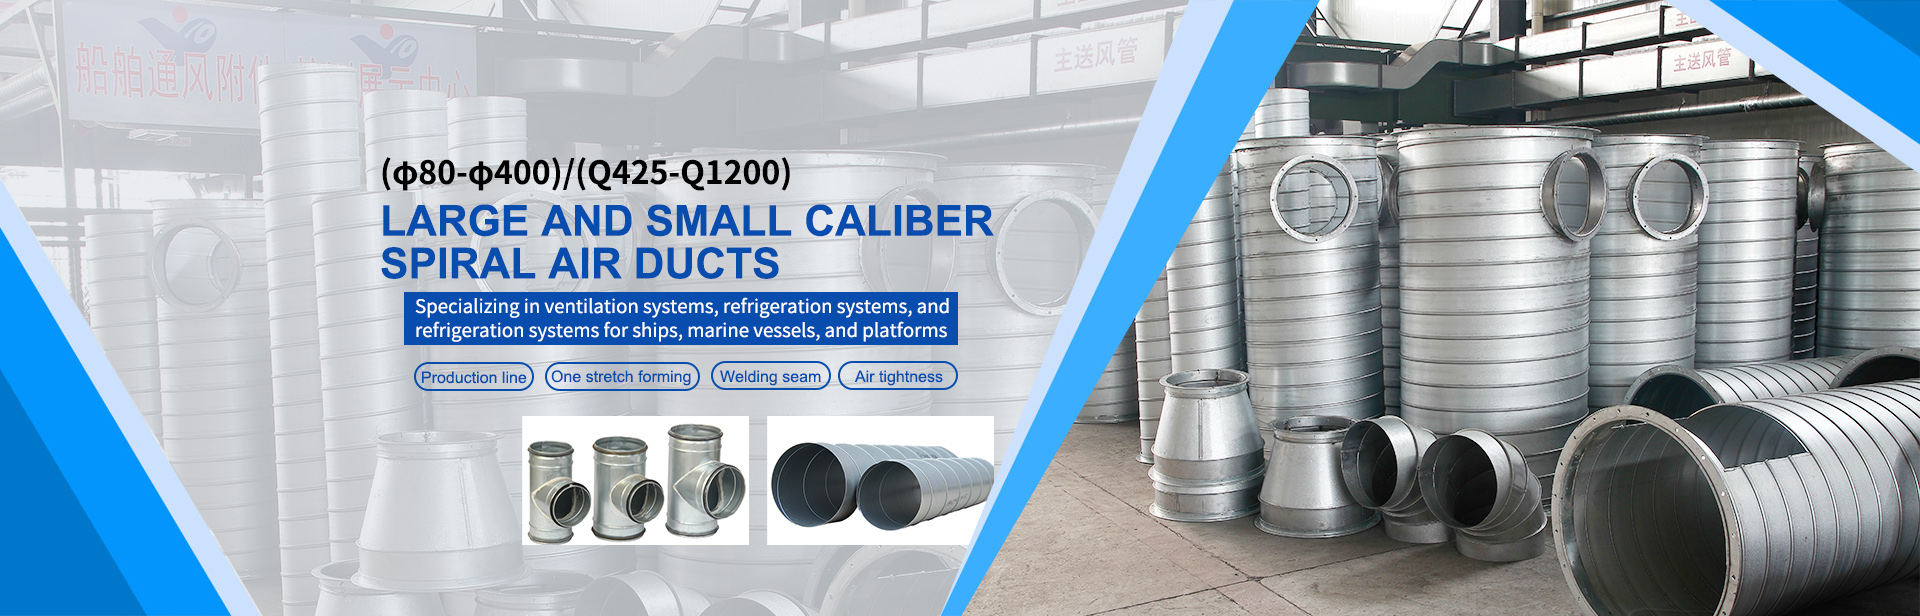 Large and small caliber spiral air ducts